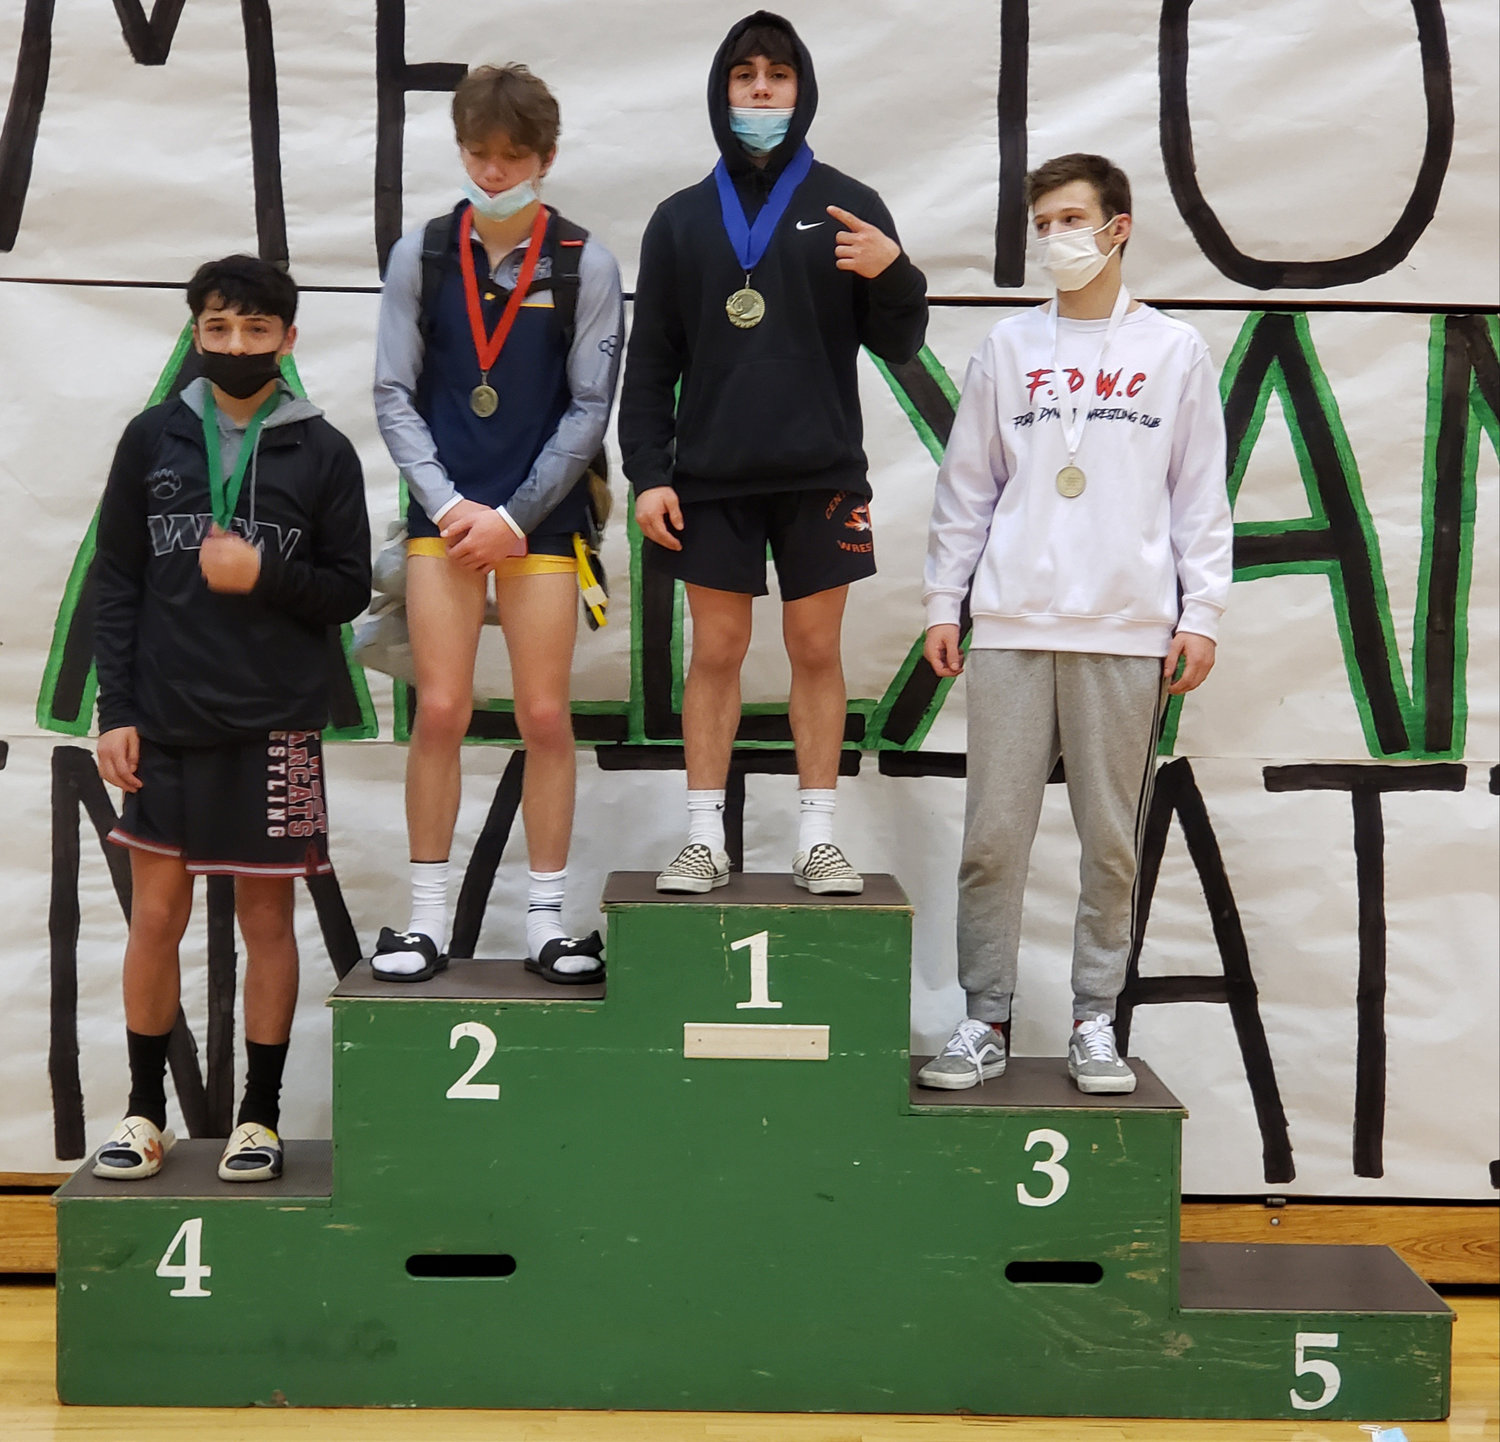 Centralia sophomore Antonio Campos, third from left, won the boys 120-pound division at the Pat Alexander Invite at Tumwater High School on Dec. 18.